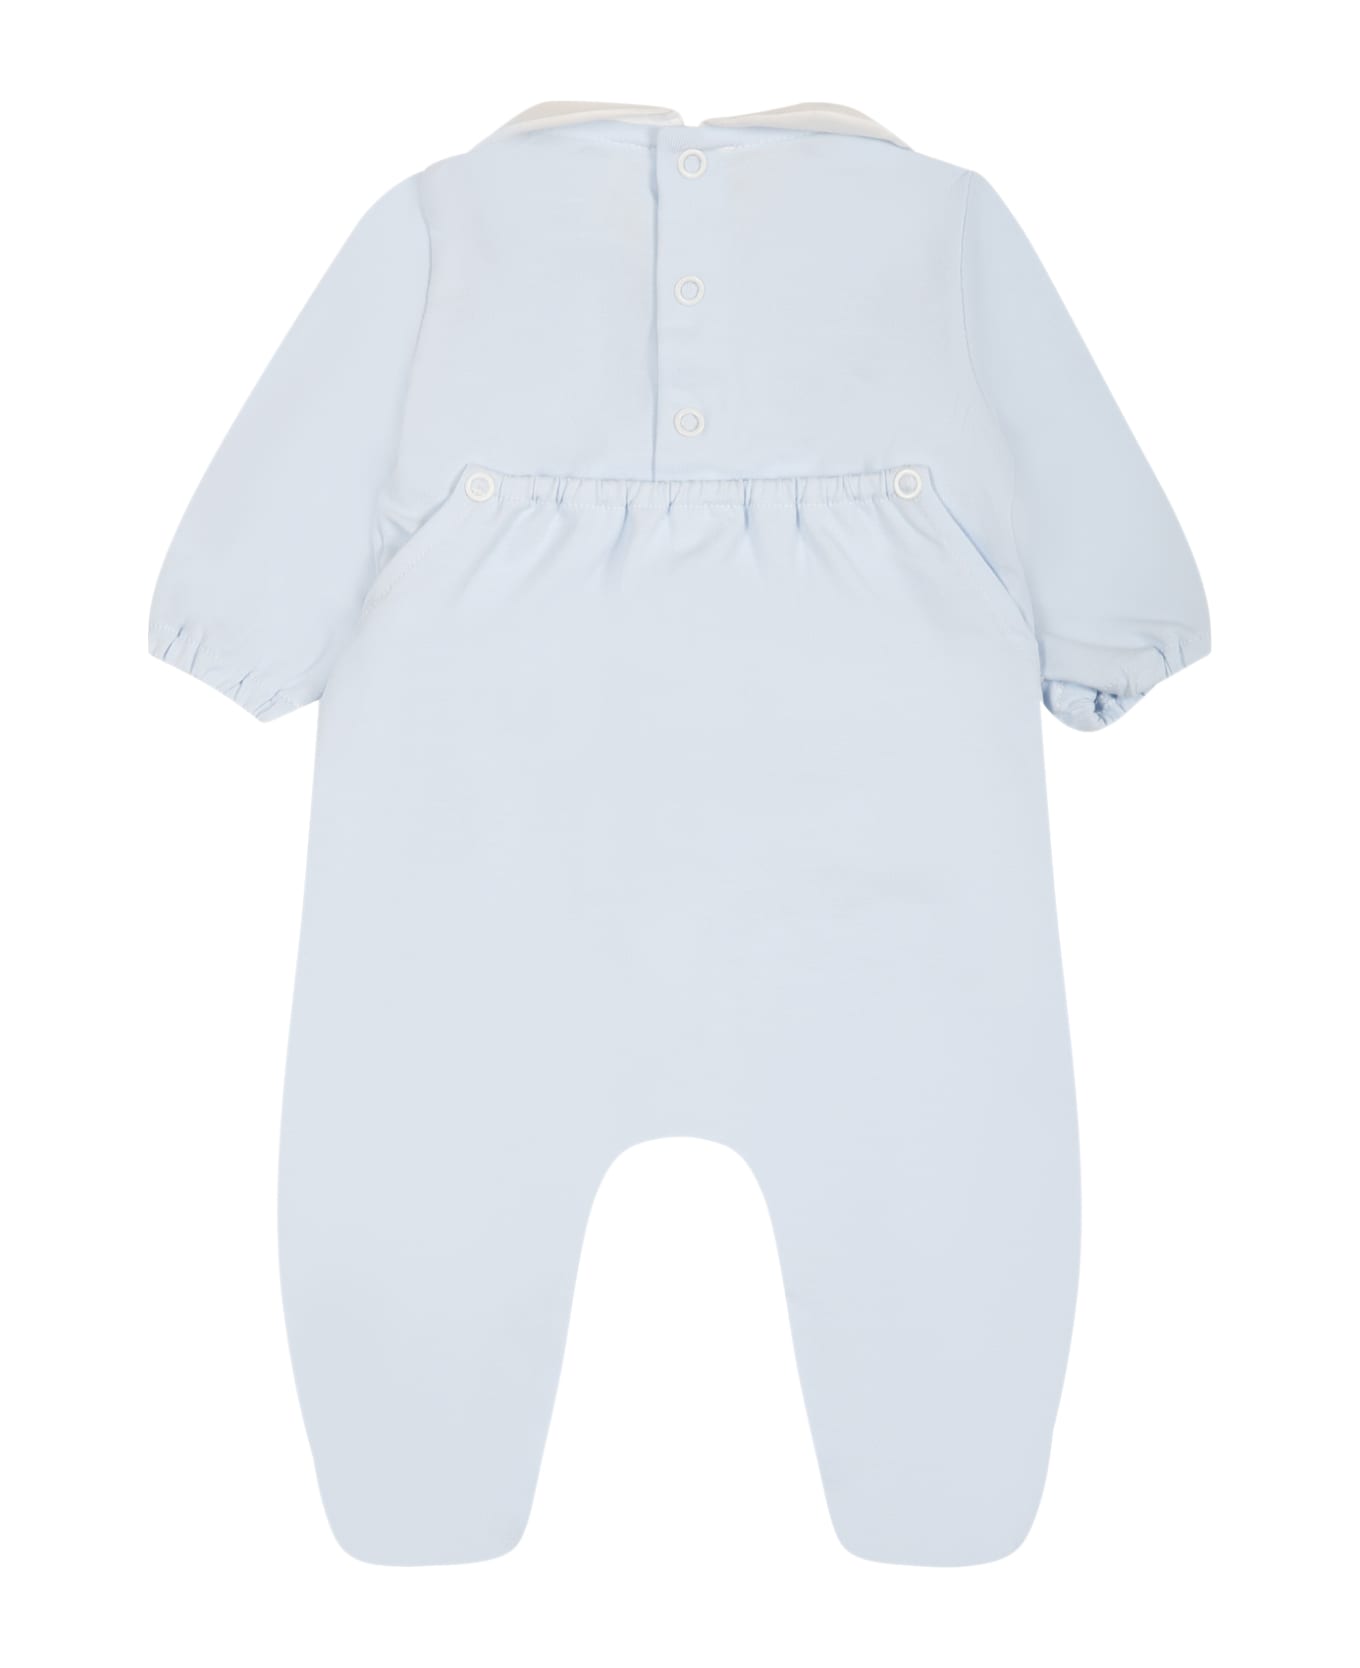 Little Bear Light Blue Onesie For Baby Boy With Writing And Heart - Cielo